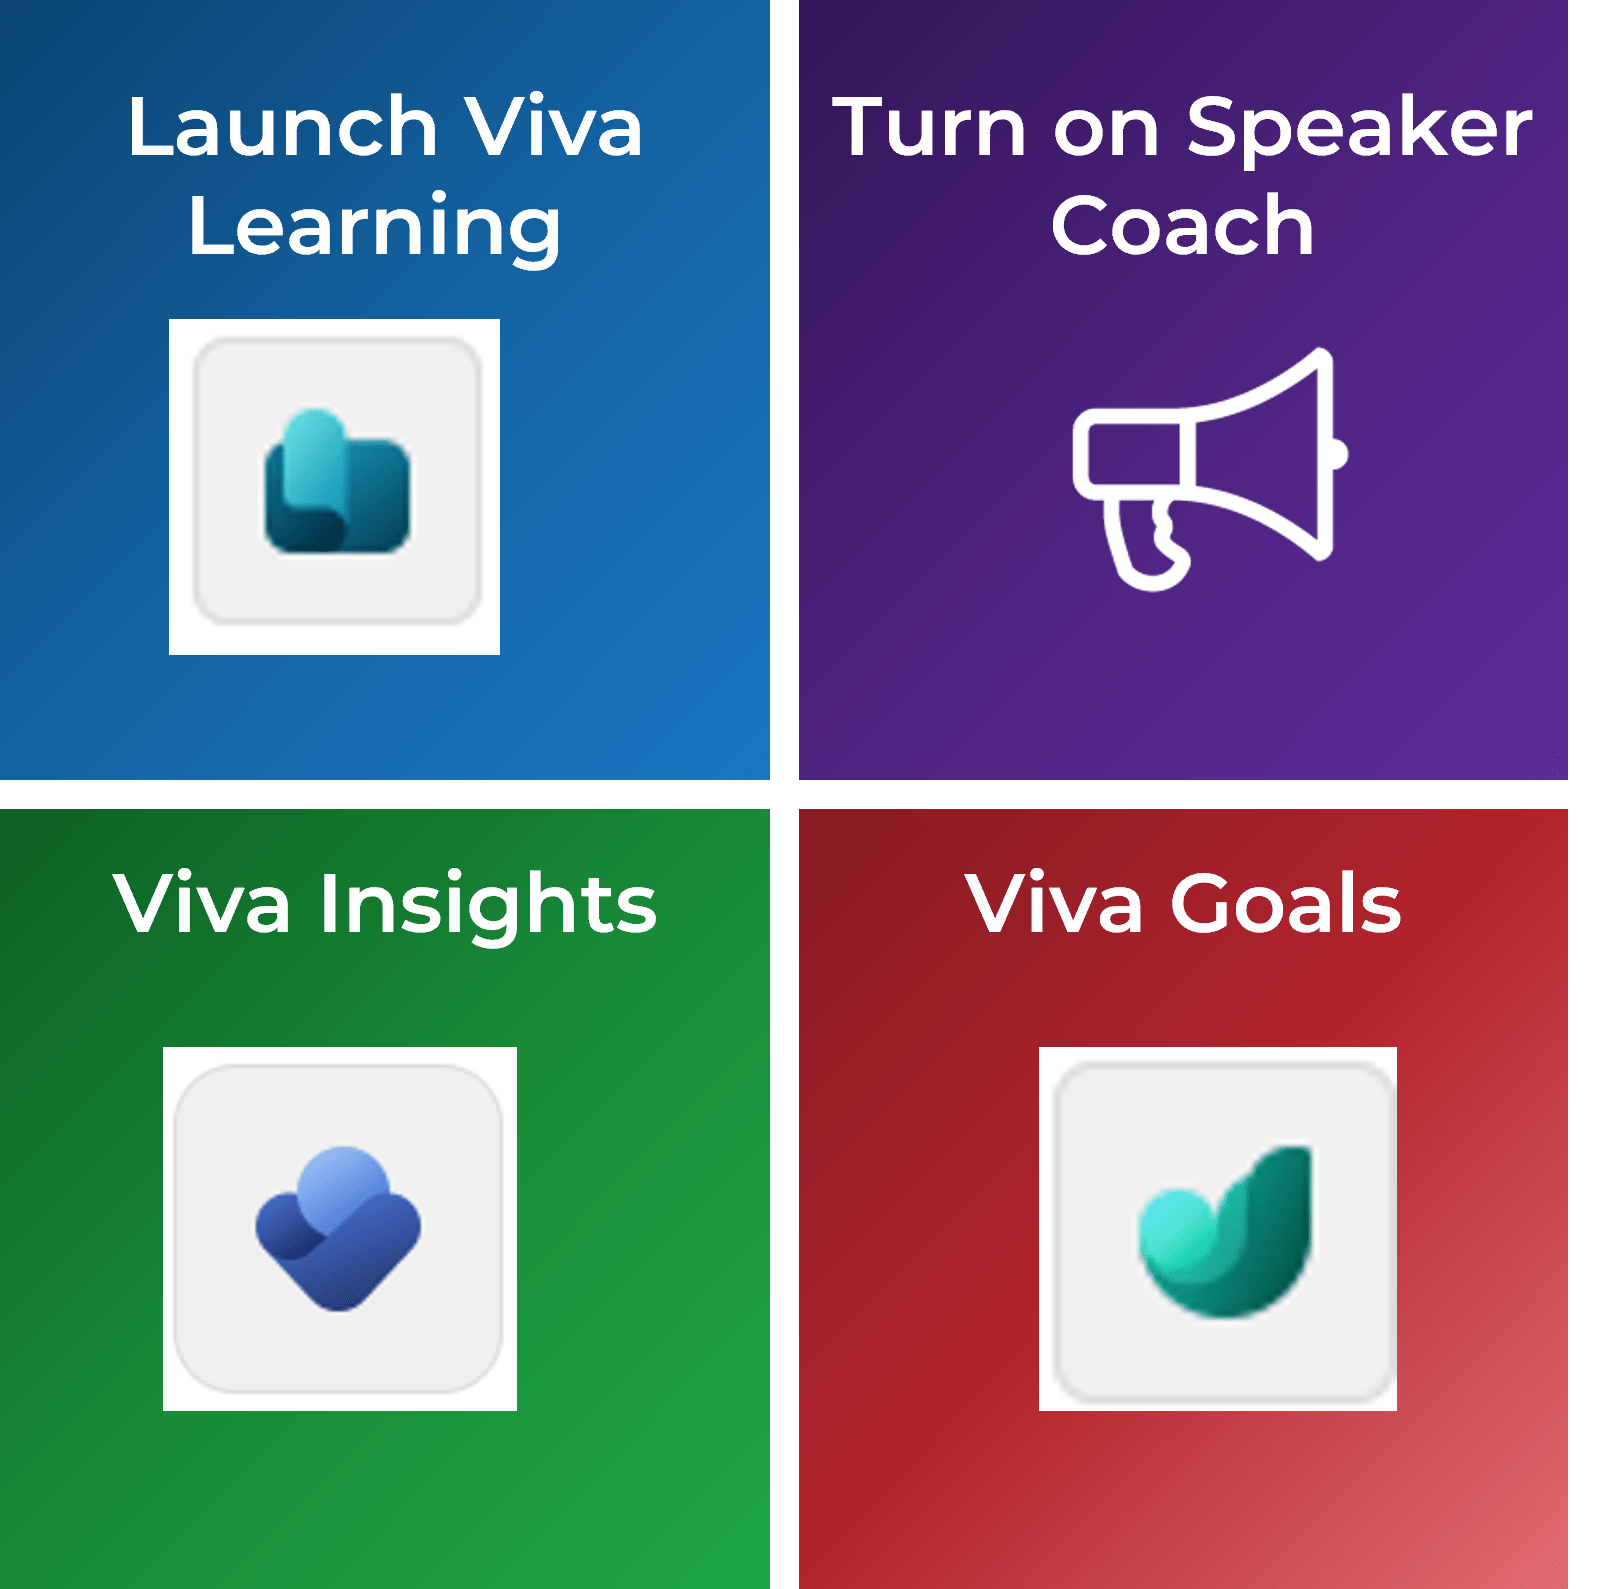 Samples of four features: 'Launch Viva Learning', 'Turn on Speaker Coach', 'Viva Insights', and 'Viva Goals'.